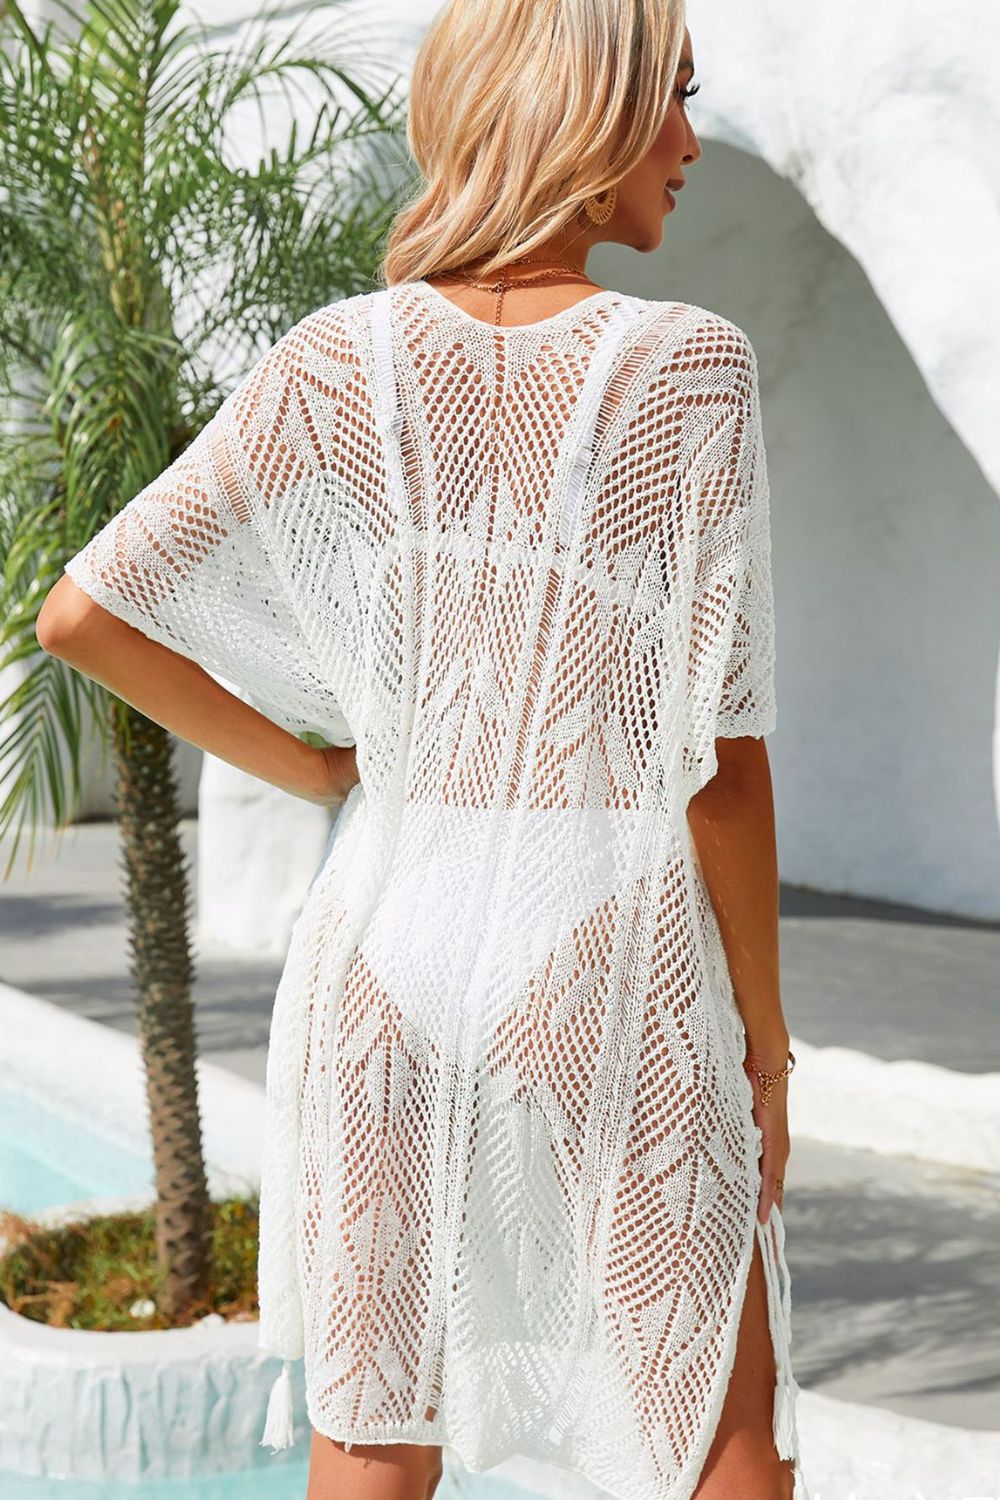 Side Slit Tassel Openwork Cover-Up Dress - ONLINE ONLY 2-10 DAY SHIPPING